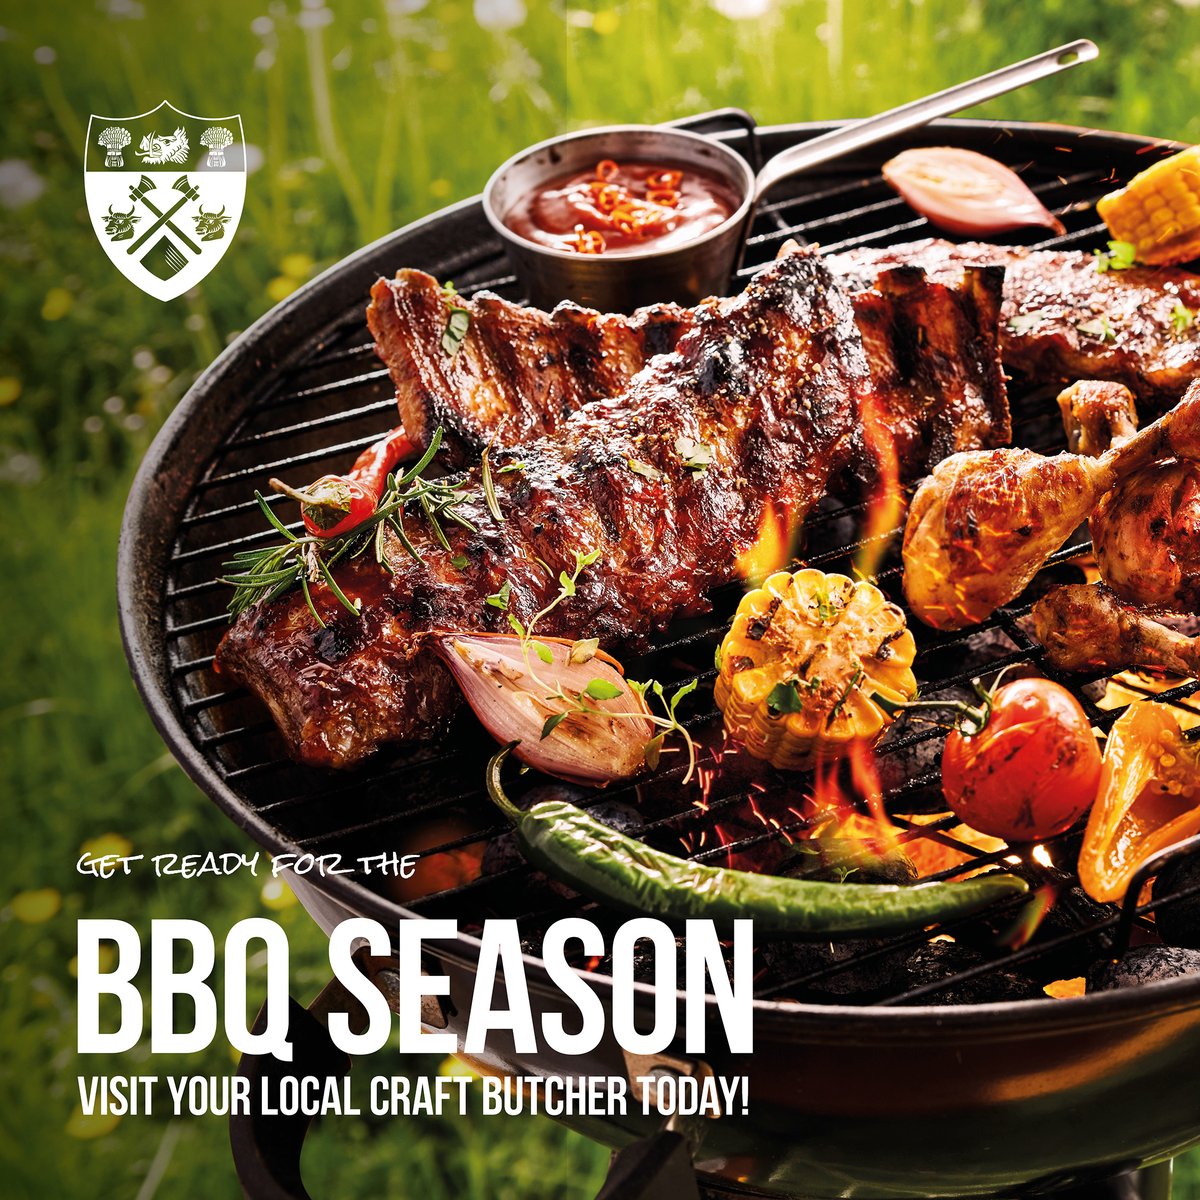 Promote BBQ week 3rd to 9th June using our digital marketing pack on your social channels and in your shop

💻 Log on to the members area to download your digital marketing pack ow.ly/B19U50Rm8a3 

#NationalCraftButchers #CraftButchers #Butchers #ShopLocal #NationalBBQWeek